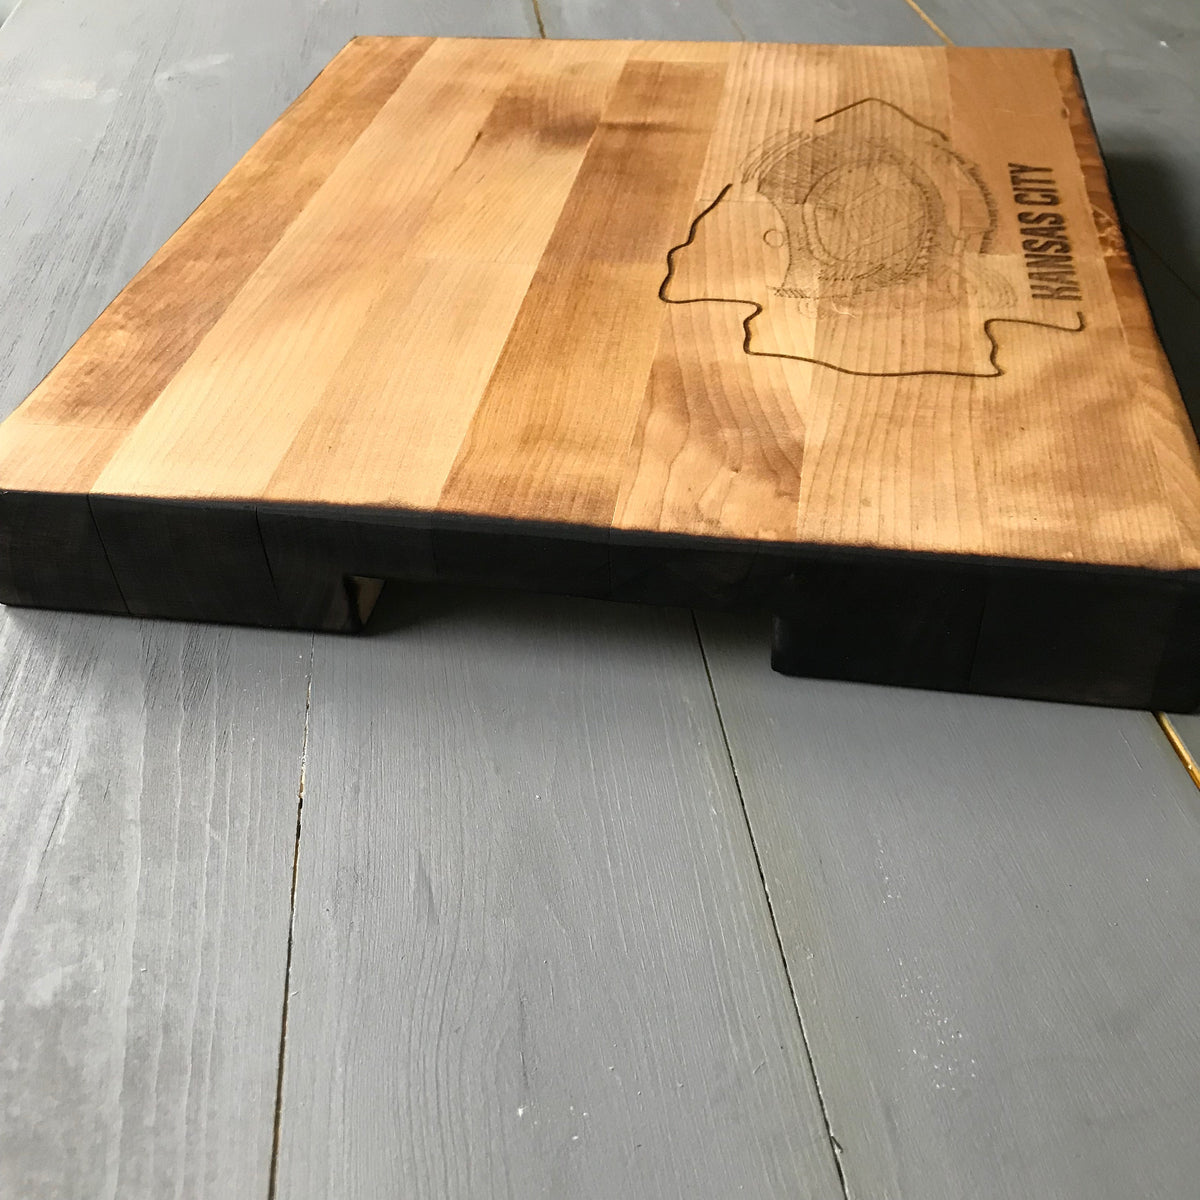 Wood Cutting Boards — The Surface Library